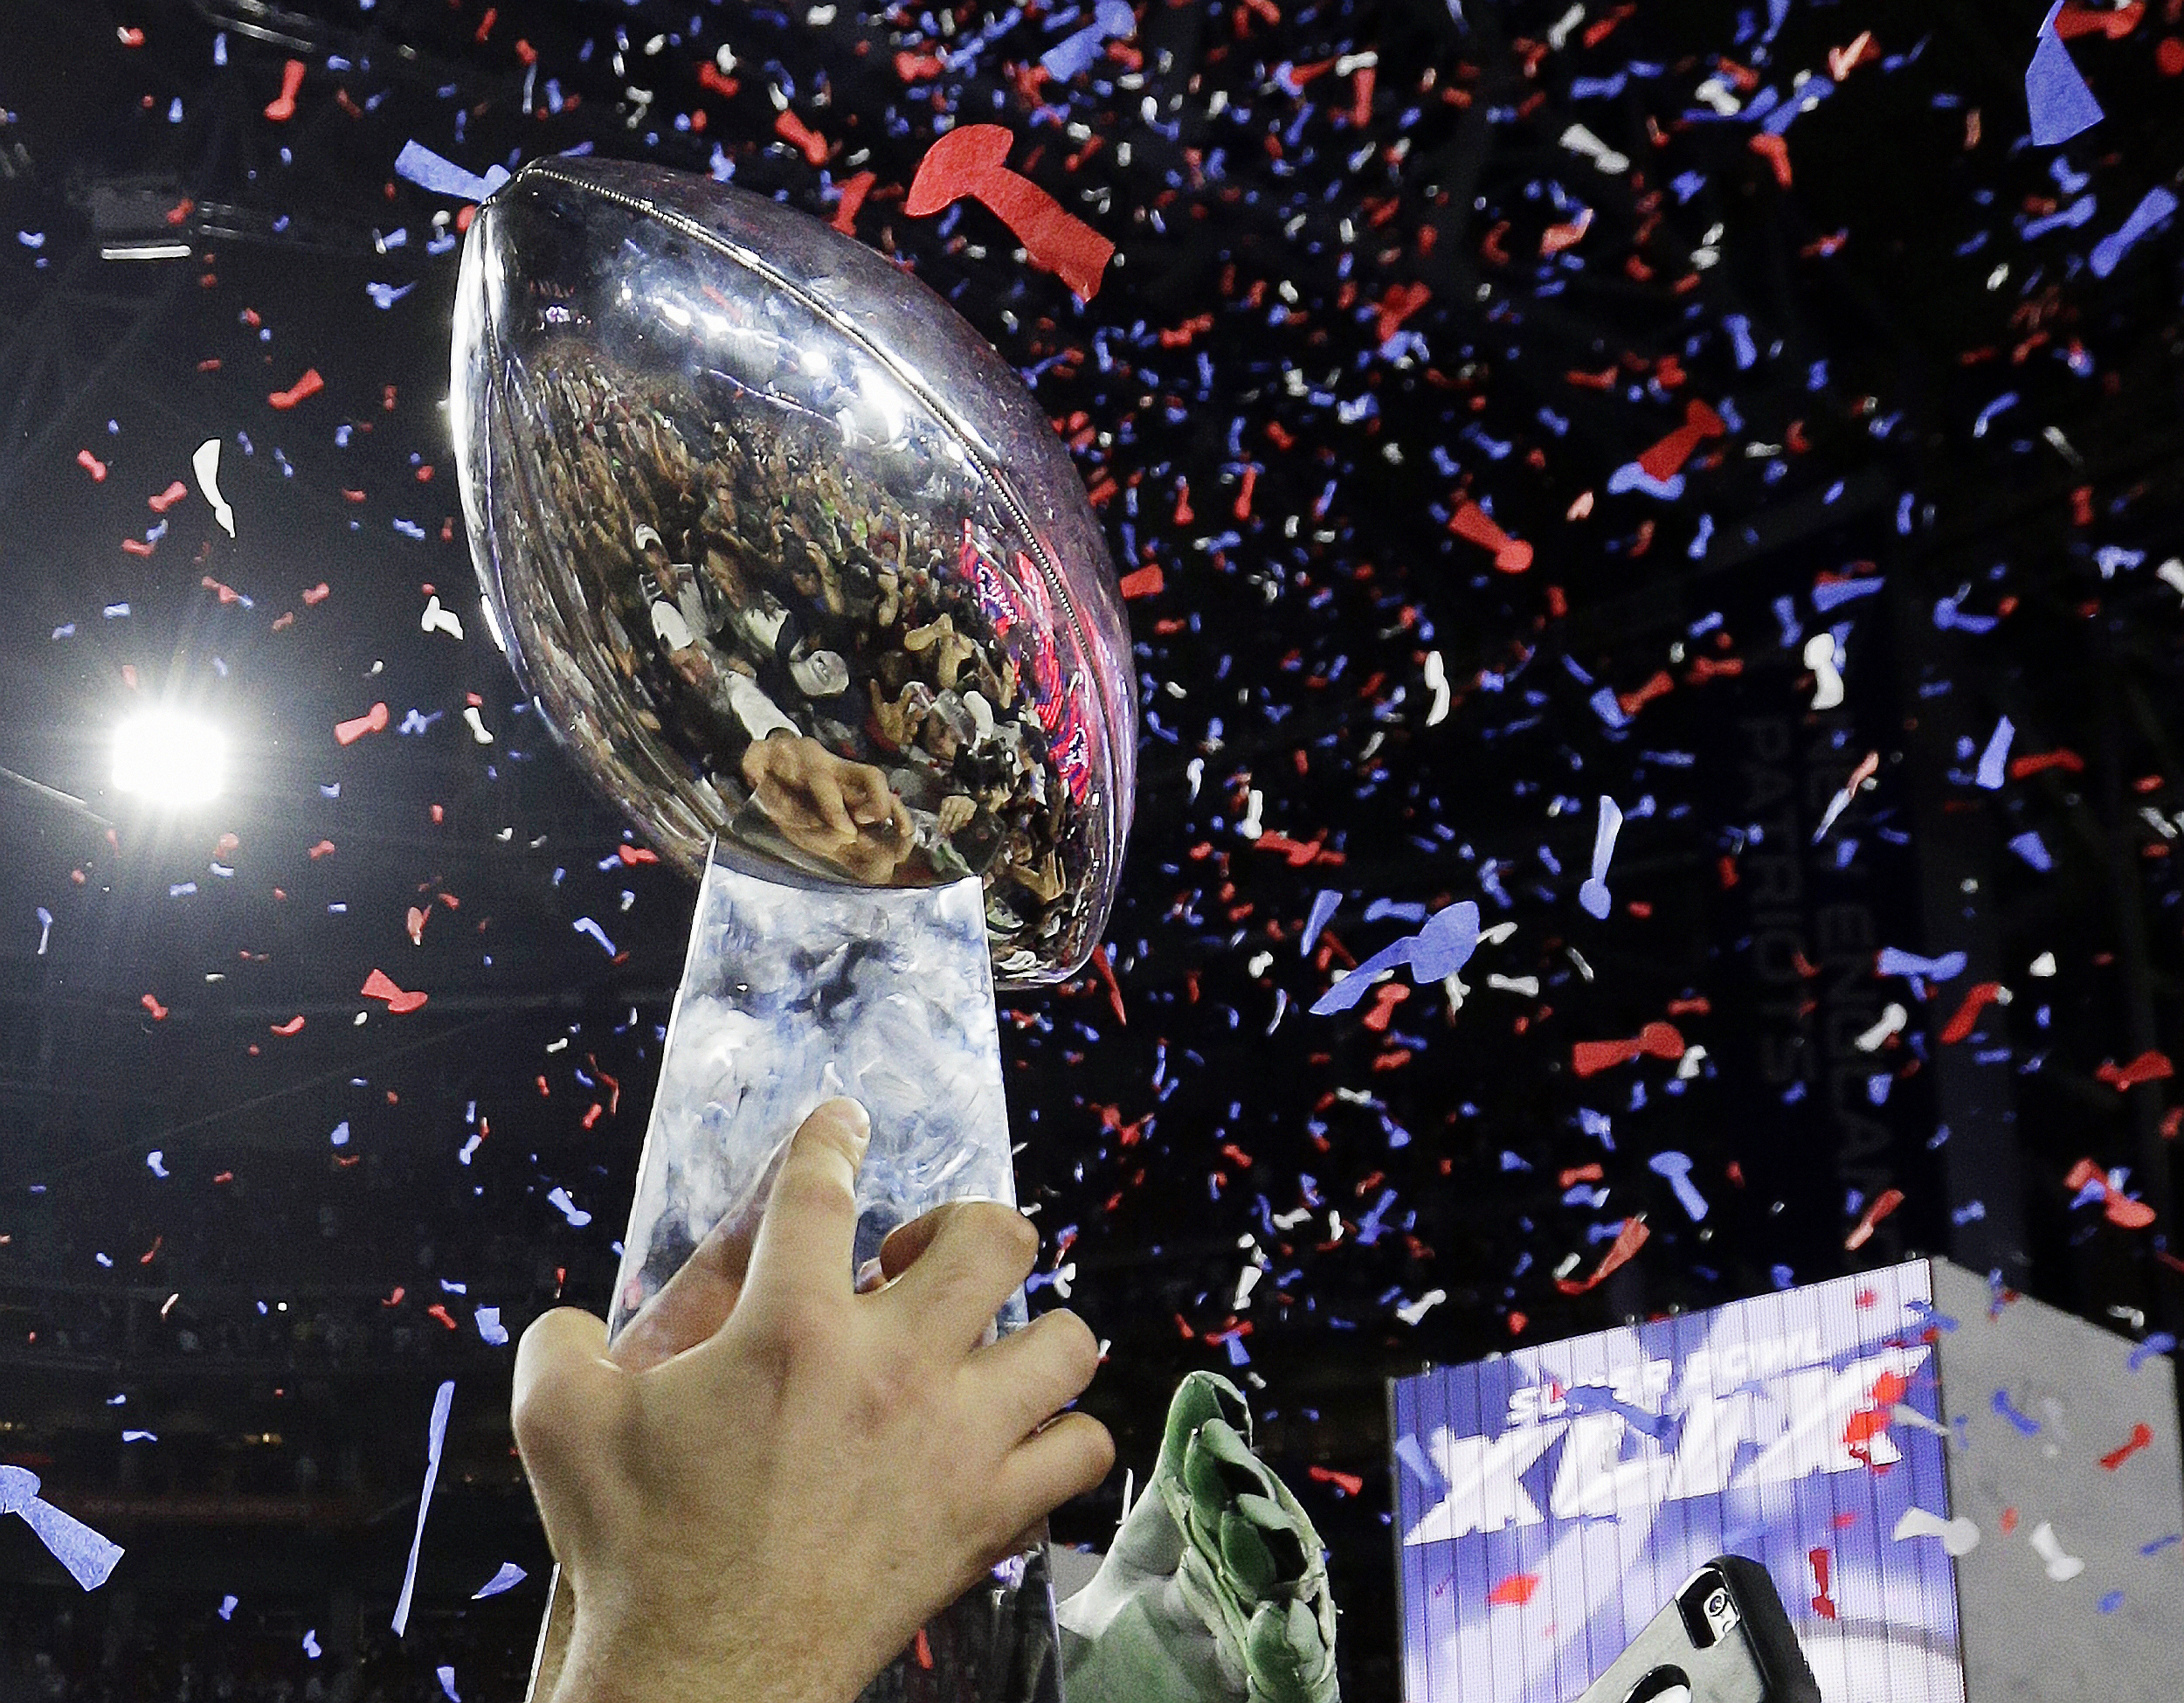 Where was the Super Bowl held in 2015?